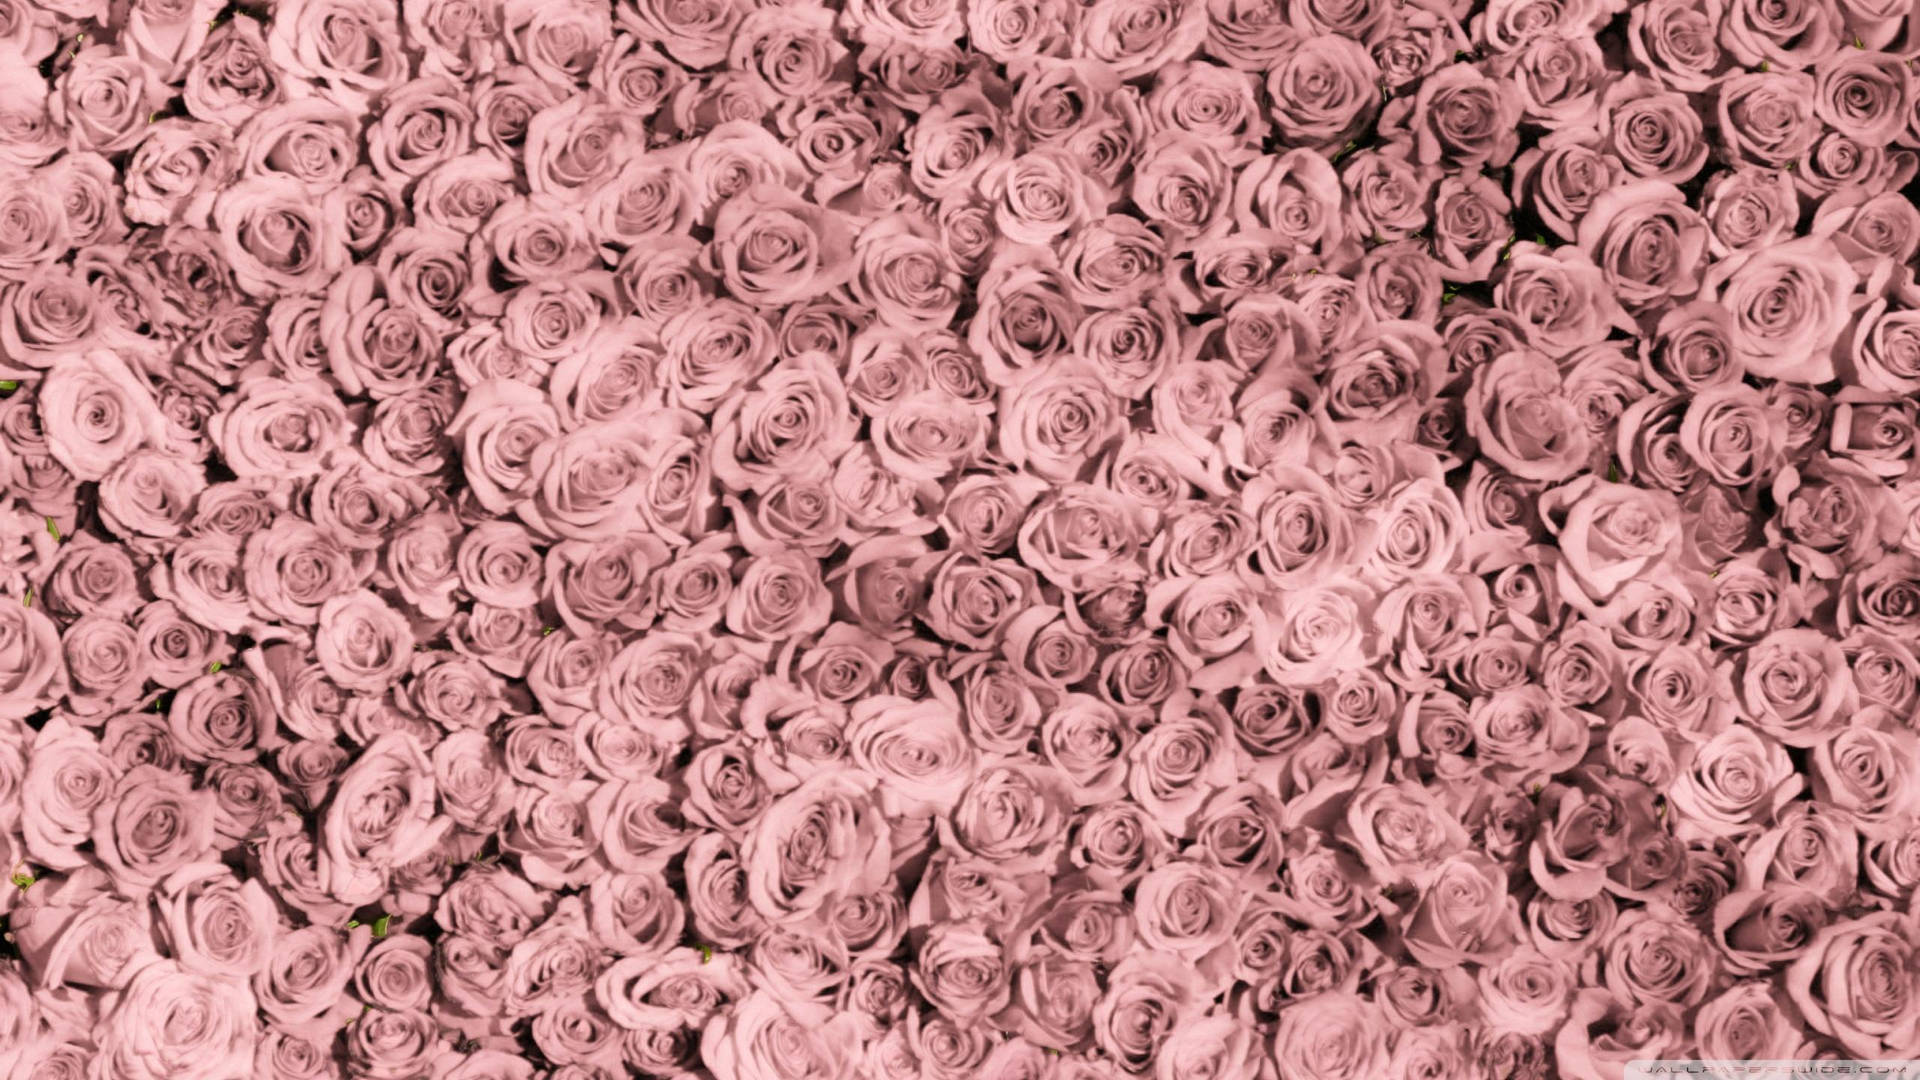 200+] Rose Gold Aesthetic Wallpapers 